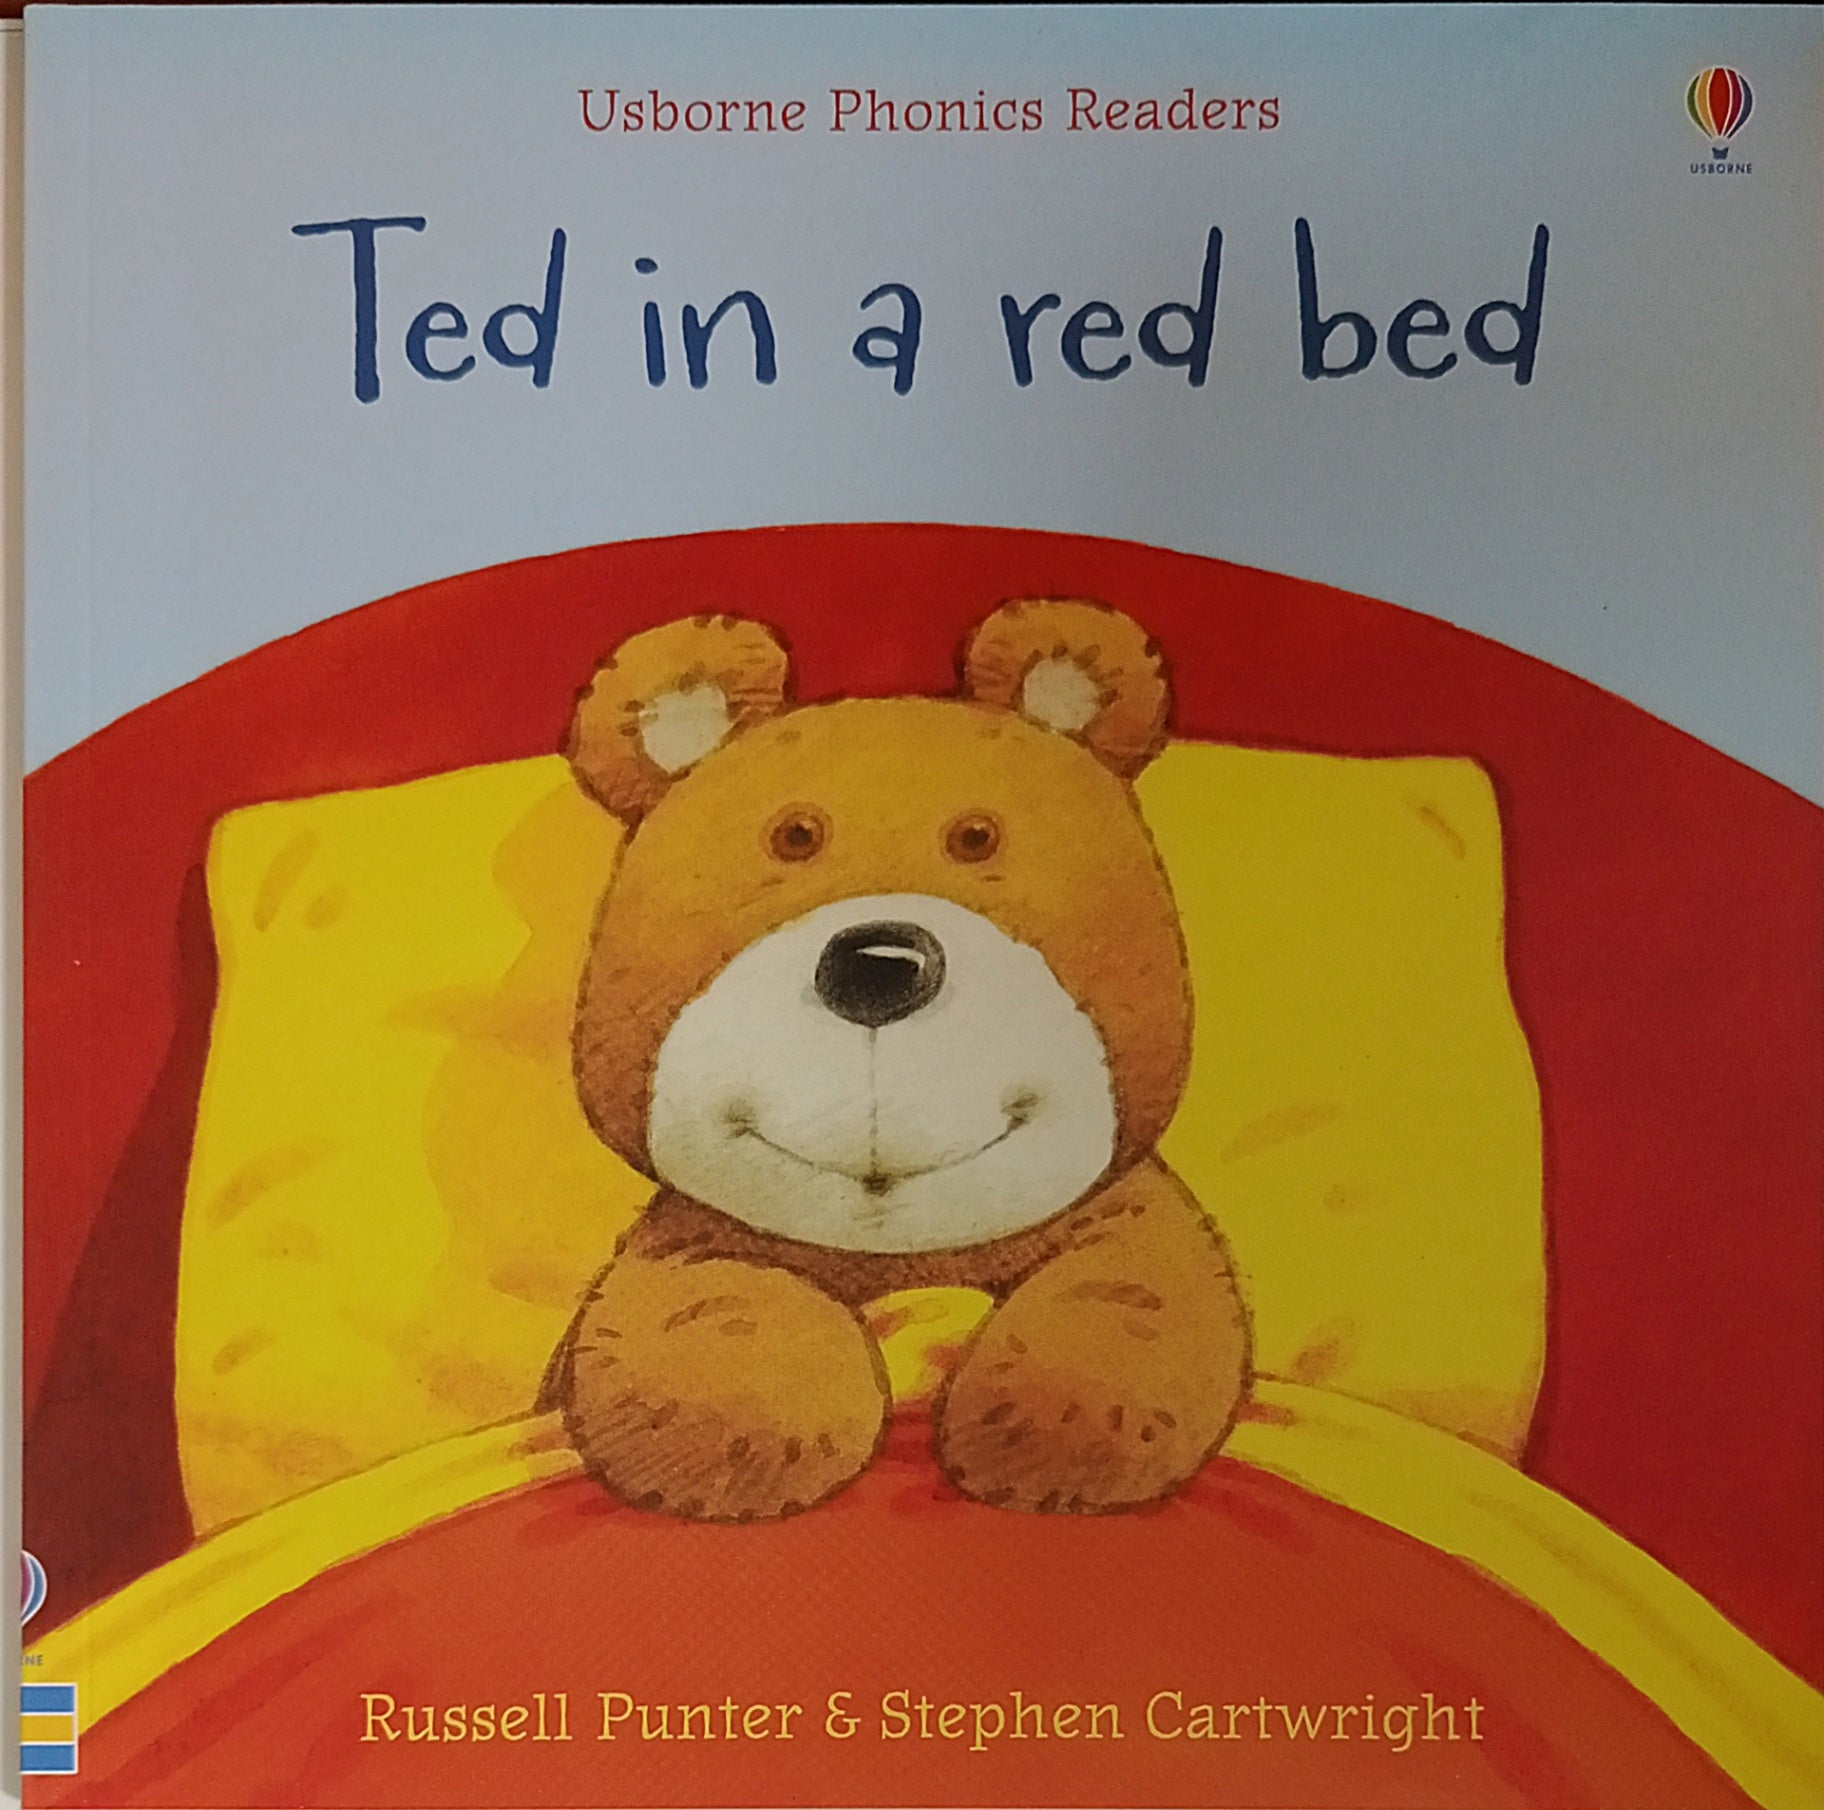 Usborne Phoenics Readers-Ted in a Red Bed